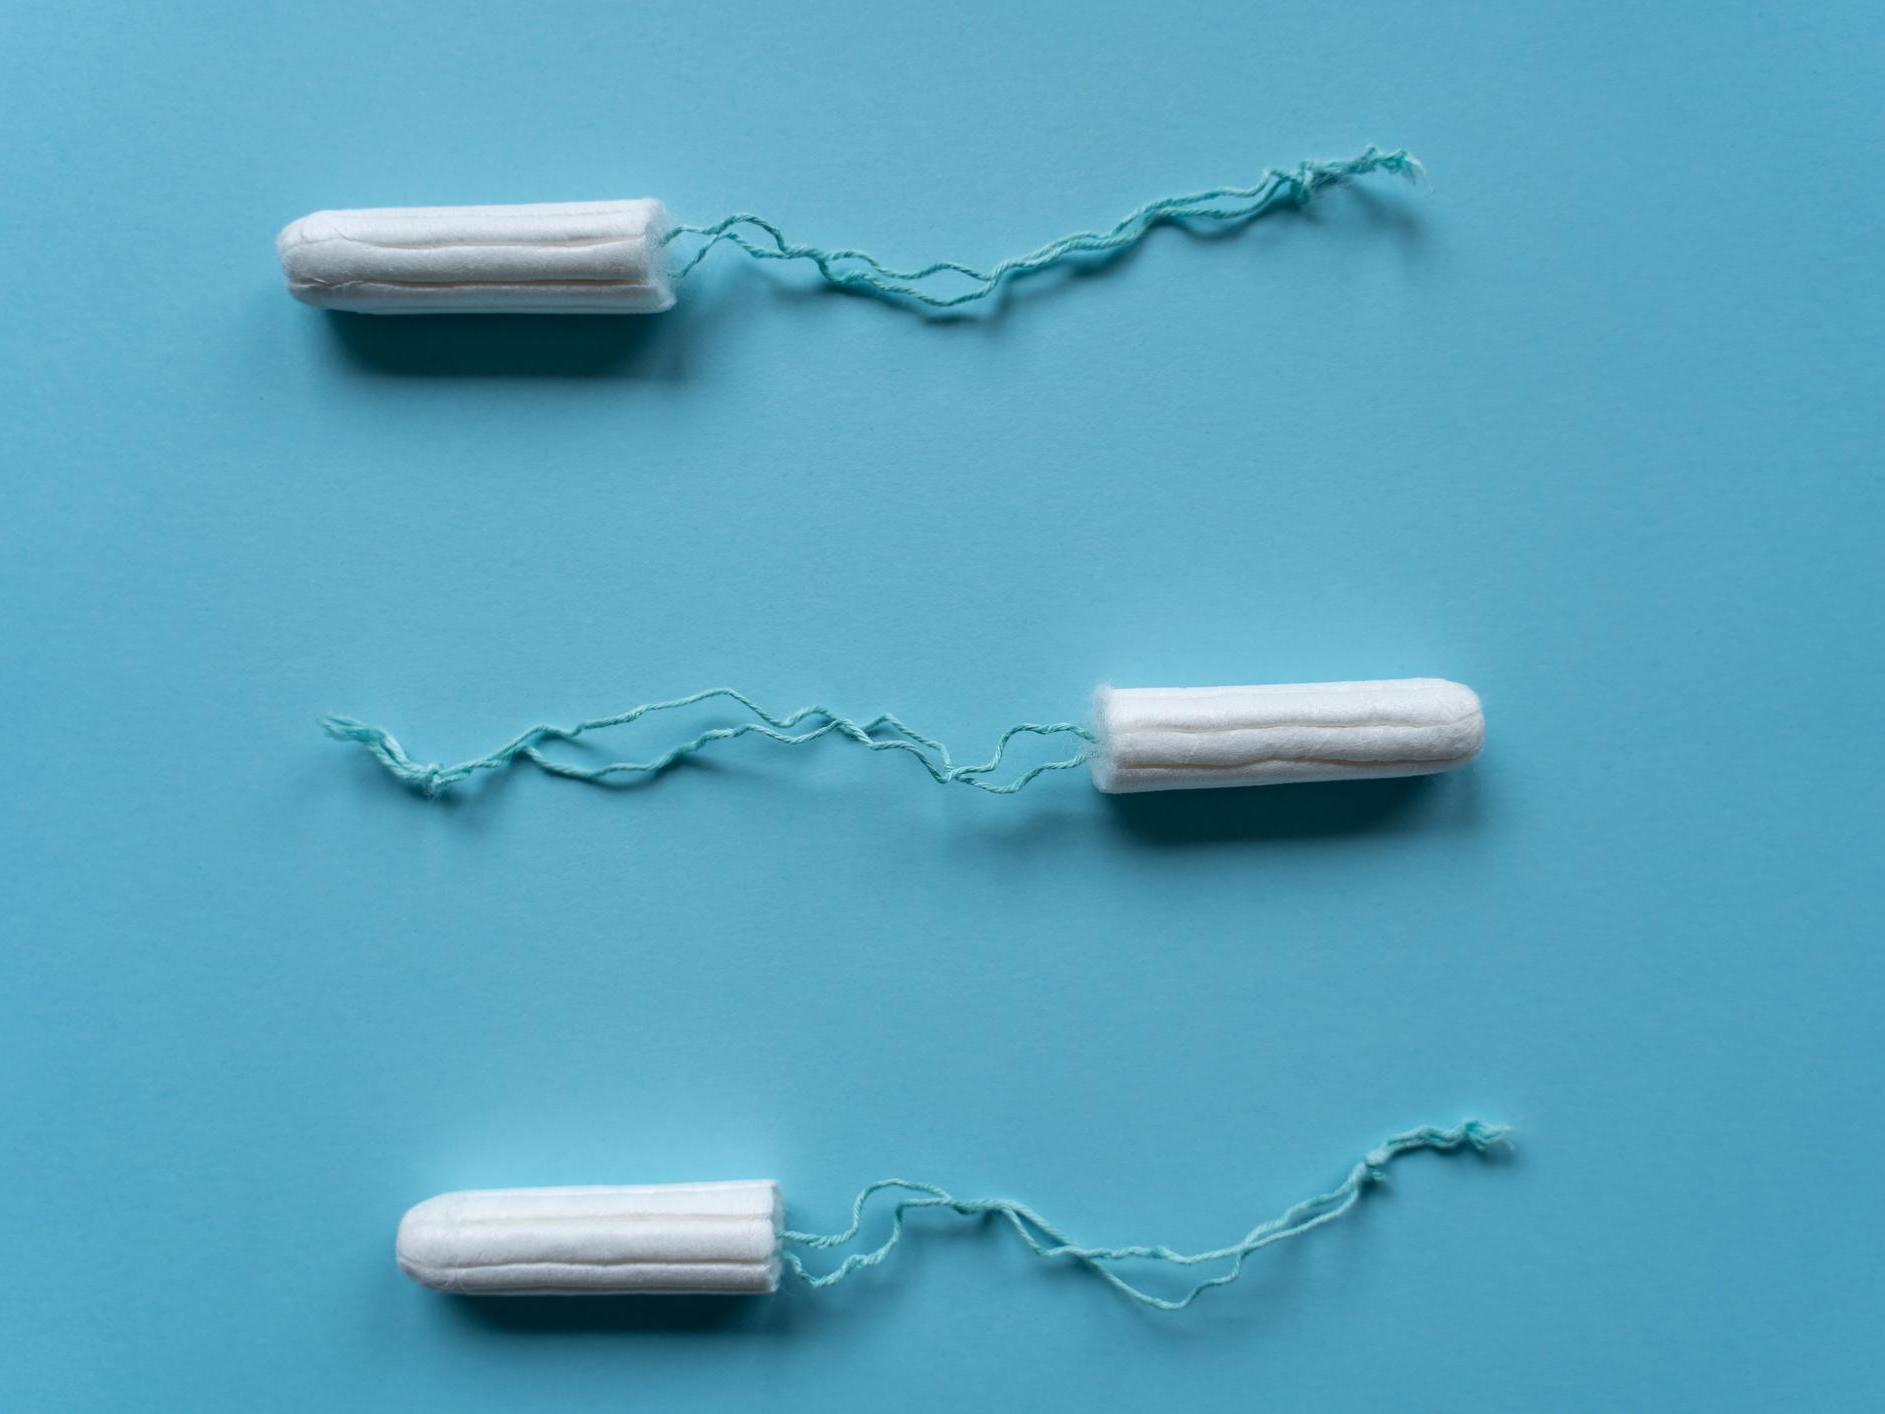 21 Unusual Uses for Tampons and Sanitary Pads